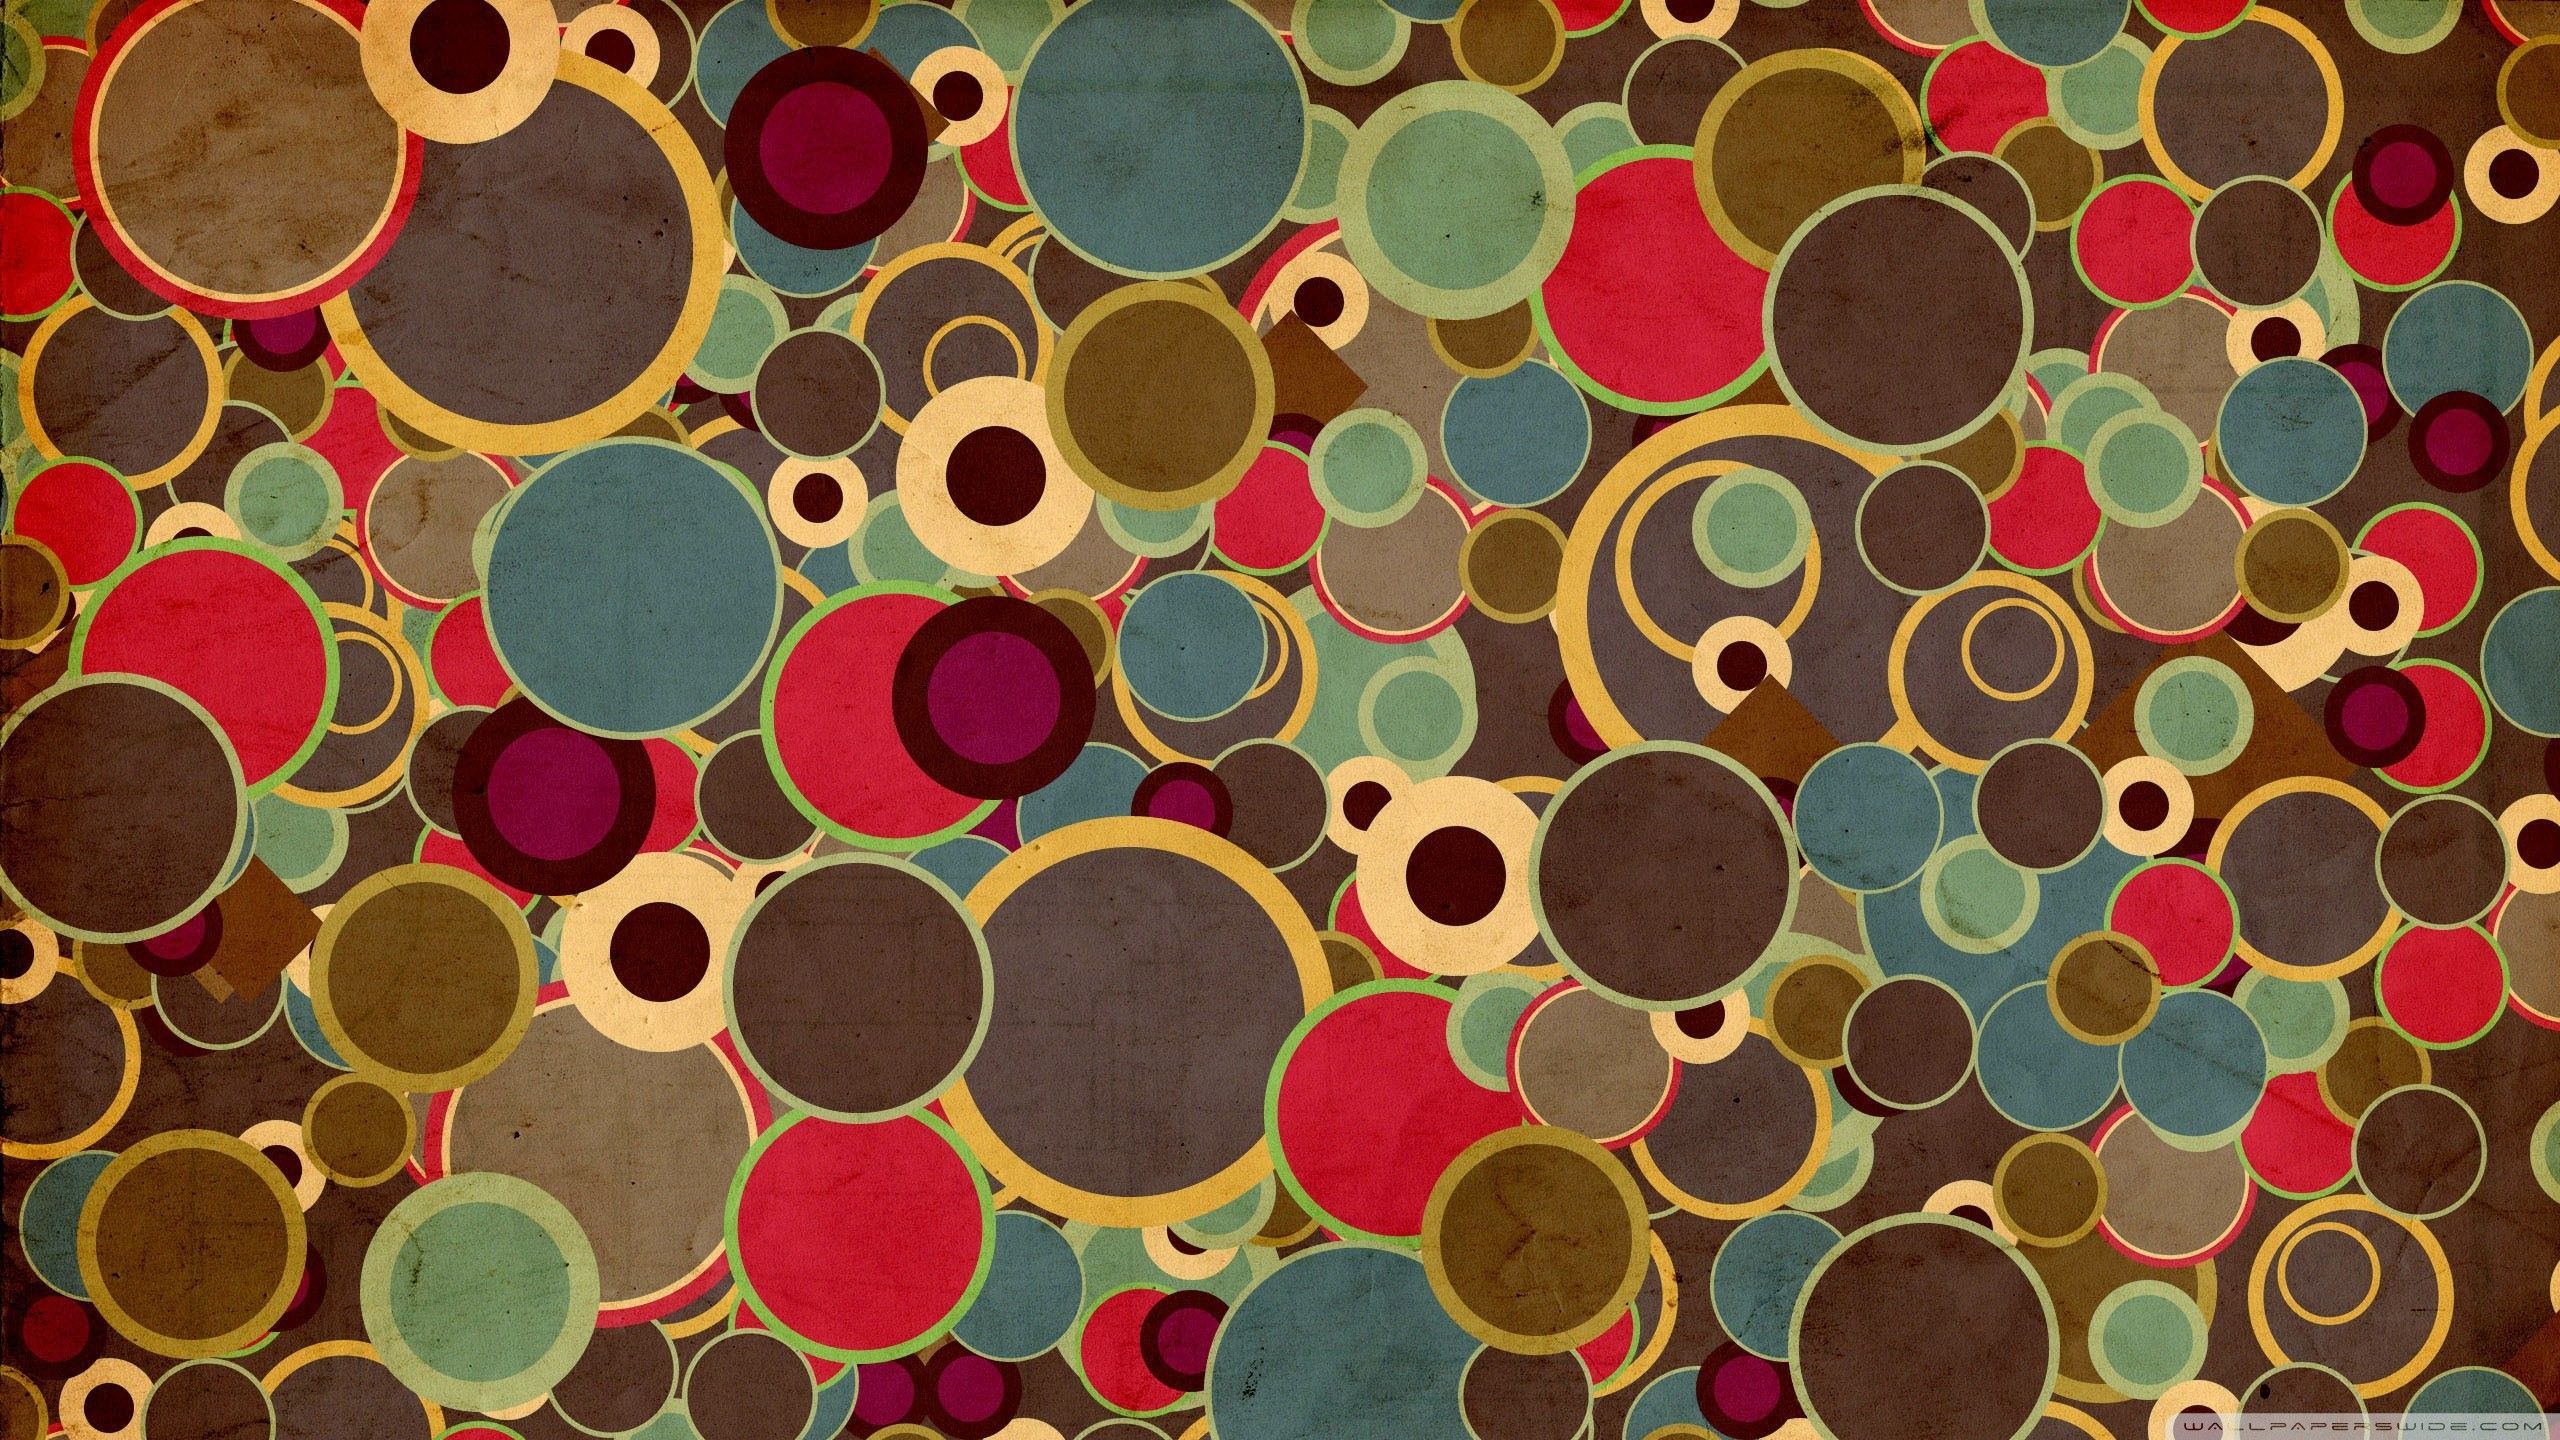 Colorful circles on a brown background wallpaper - 70s